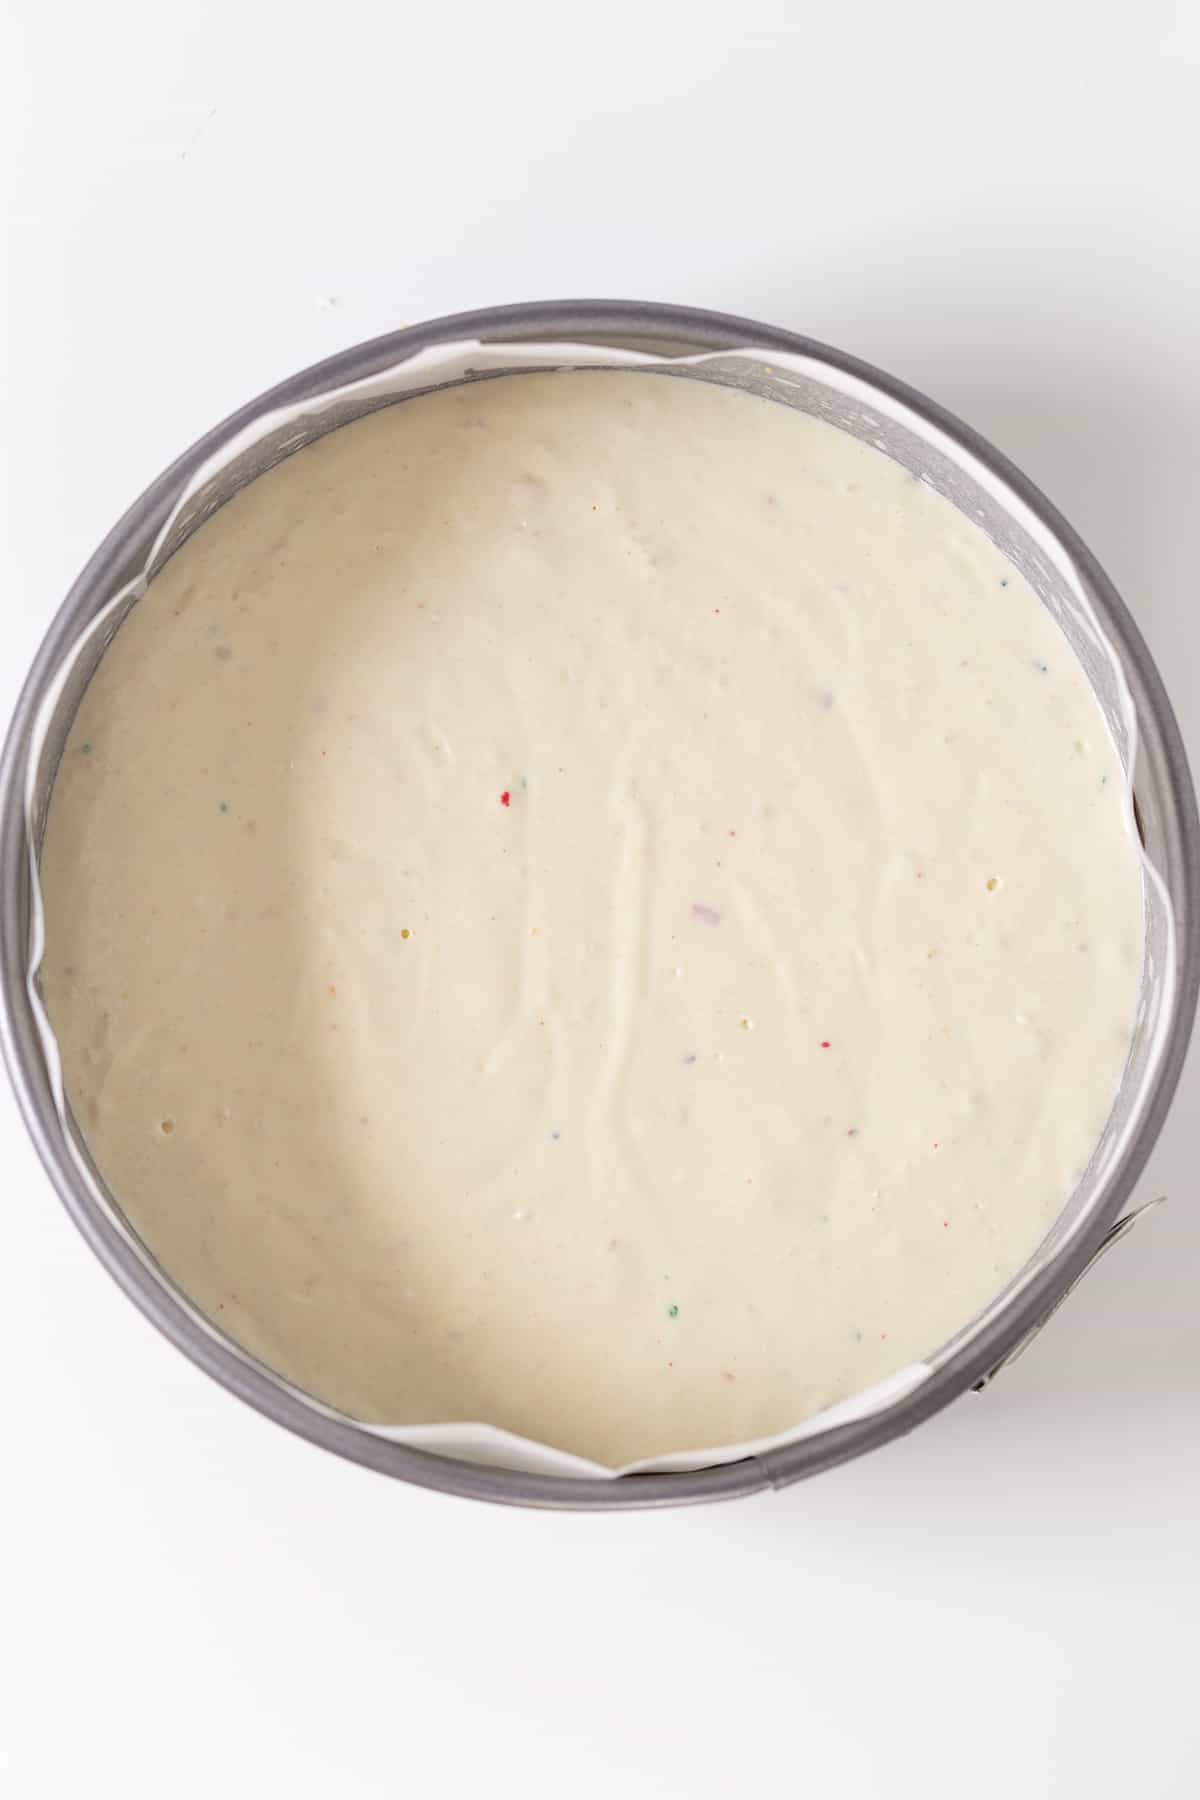 Cheesecake batter in a pan on a white background.